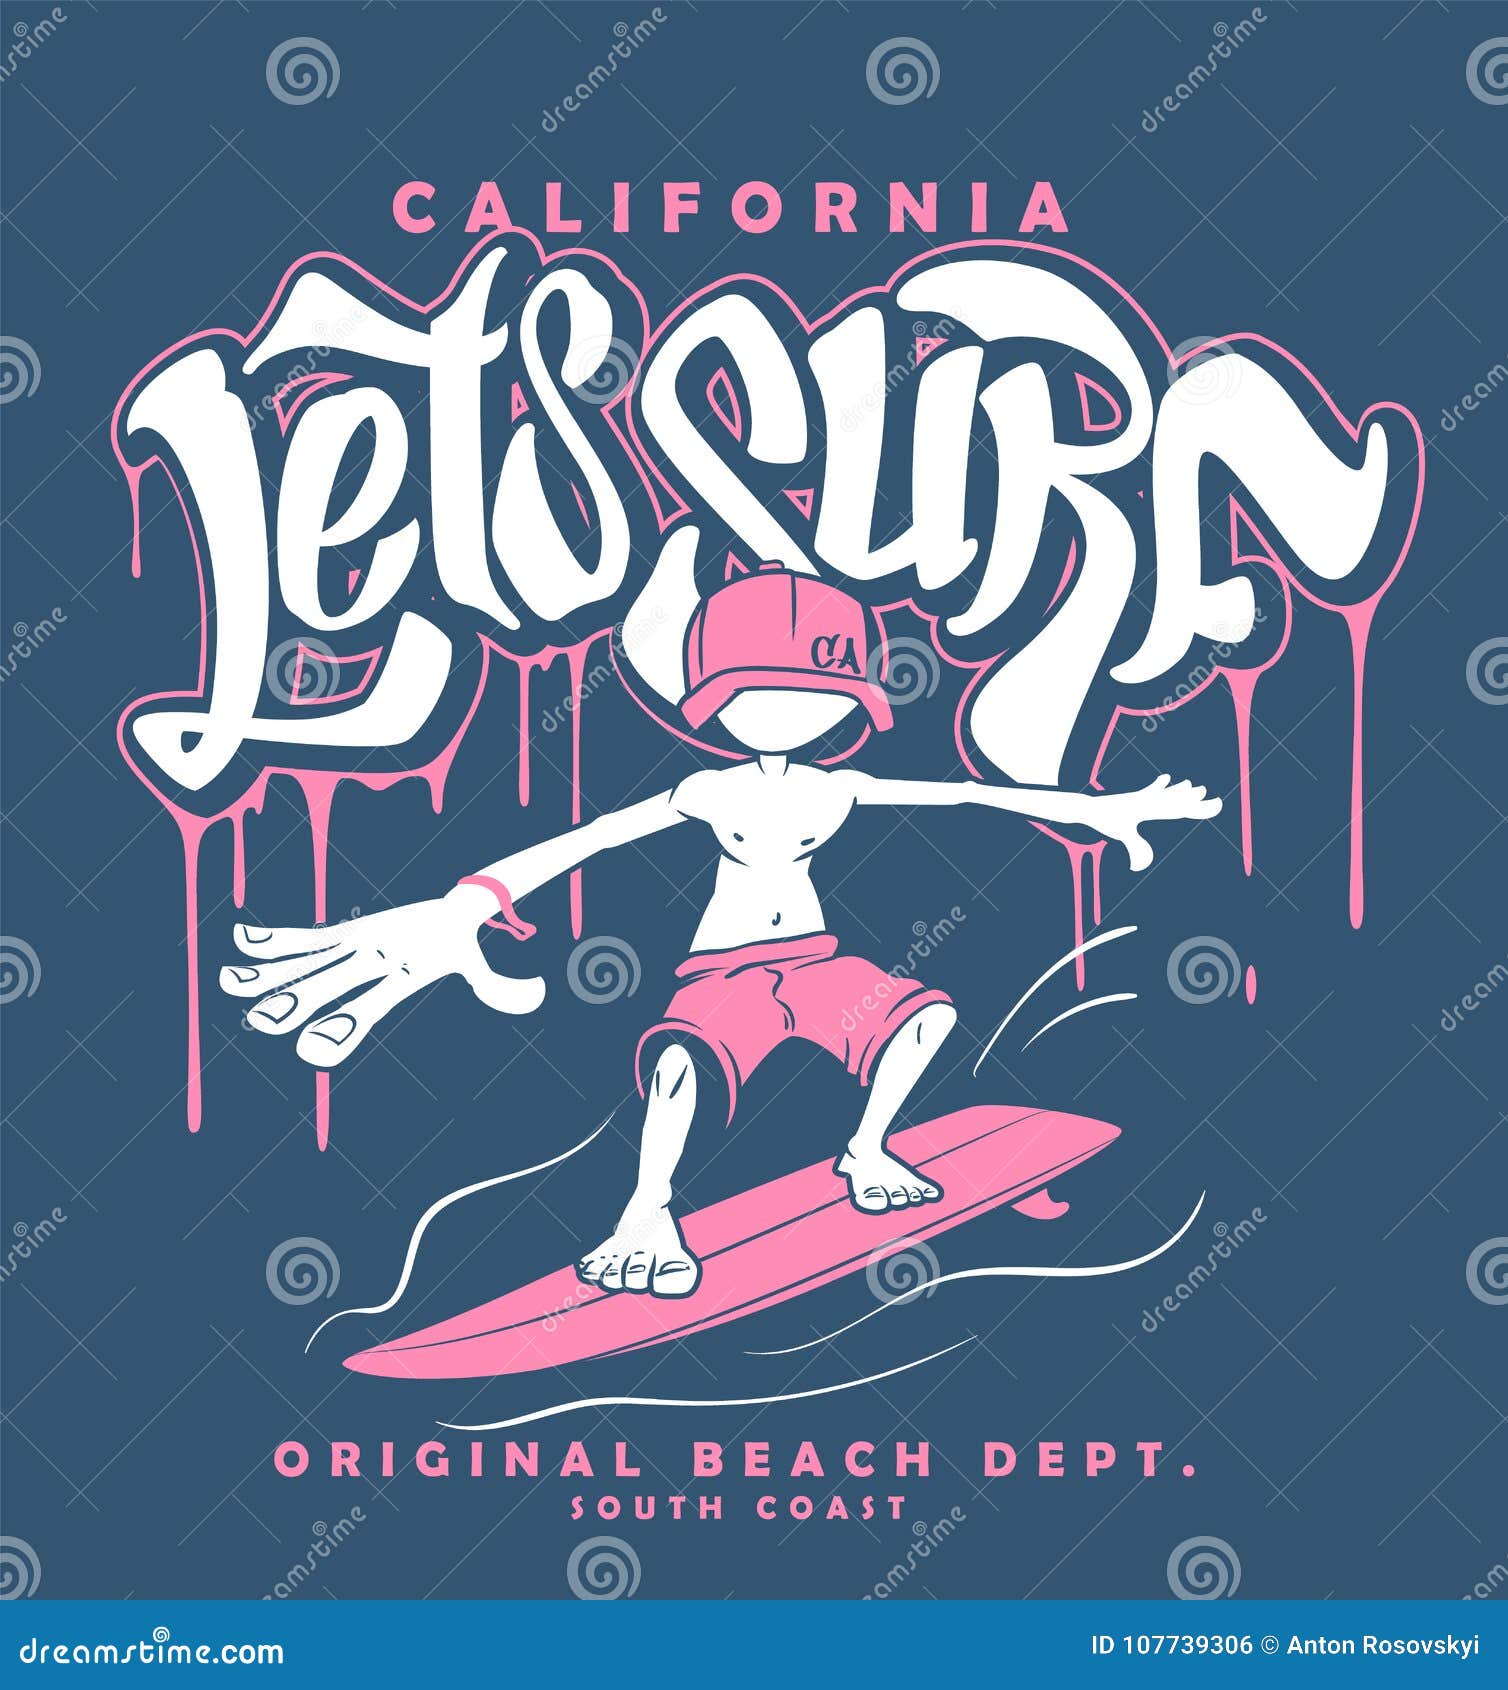 dude on surfboard and lettering,  for t-shirt print.